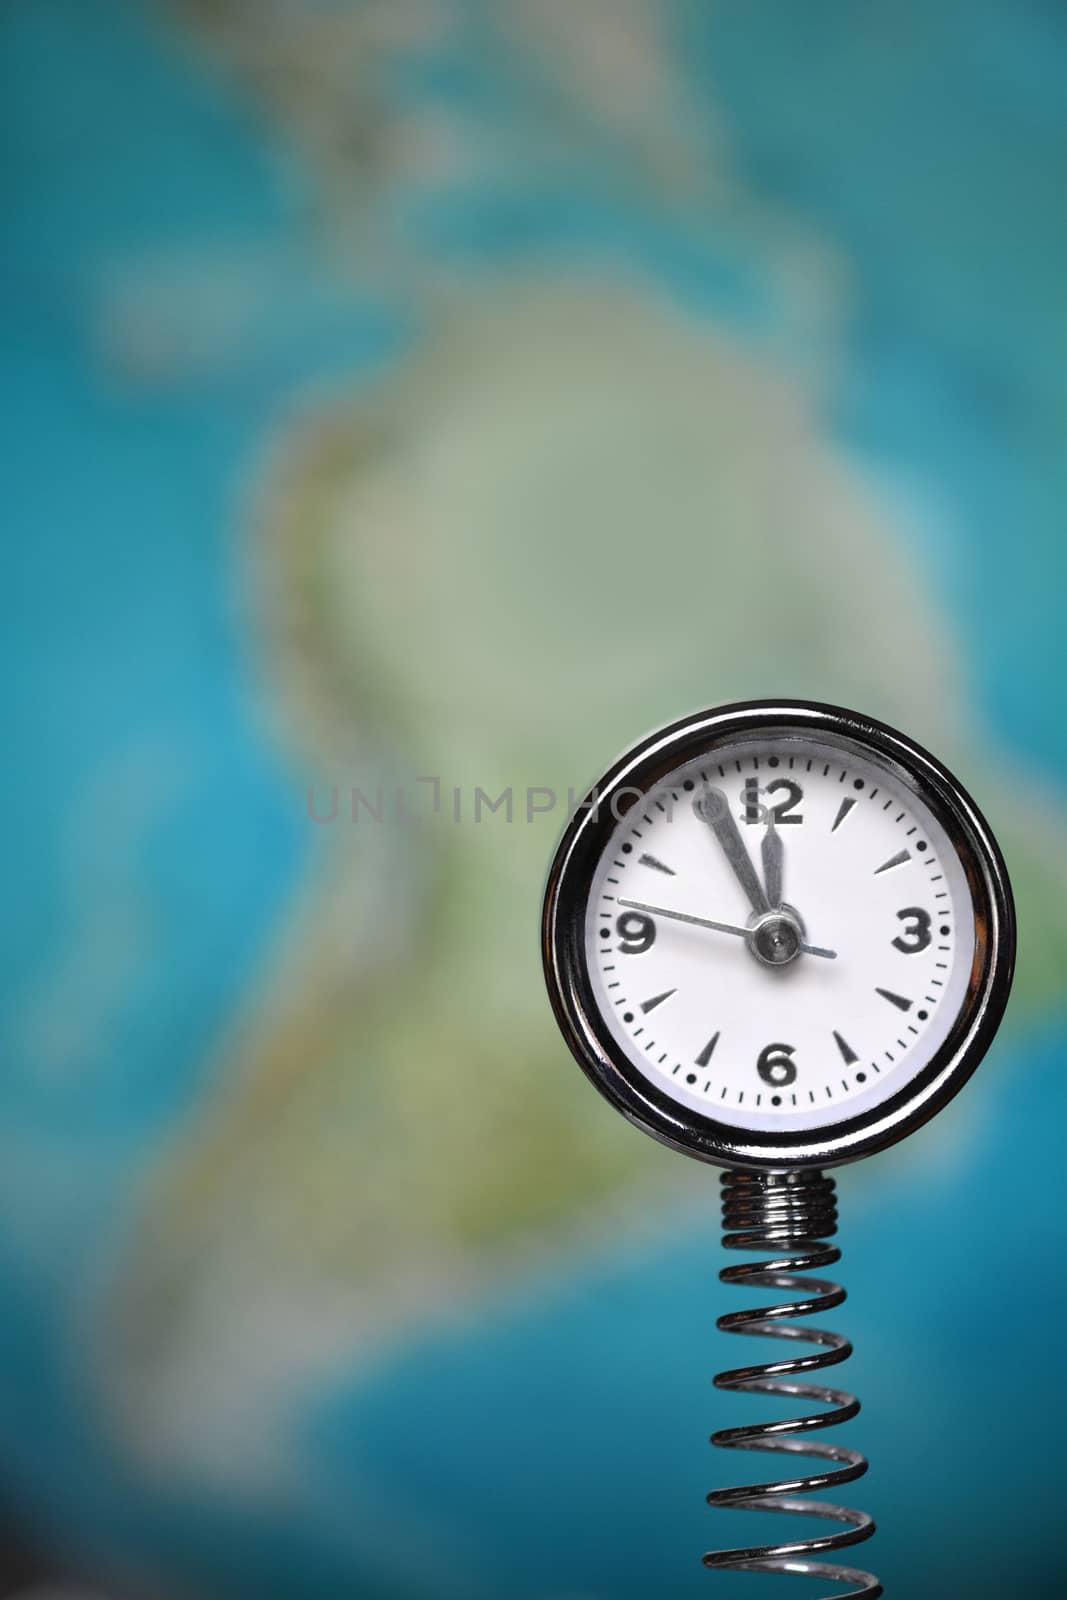 Clock showing 11:56 in front of blurred globe